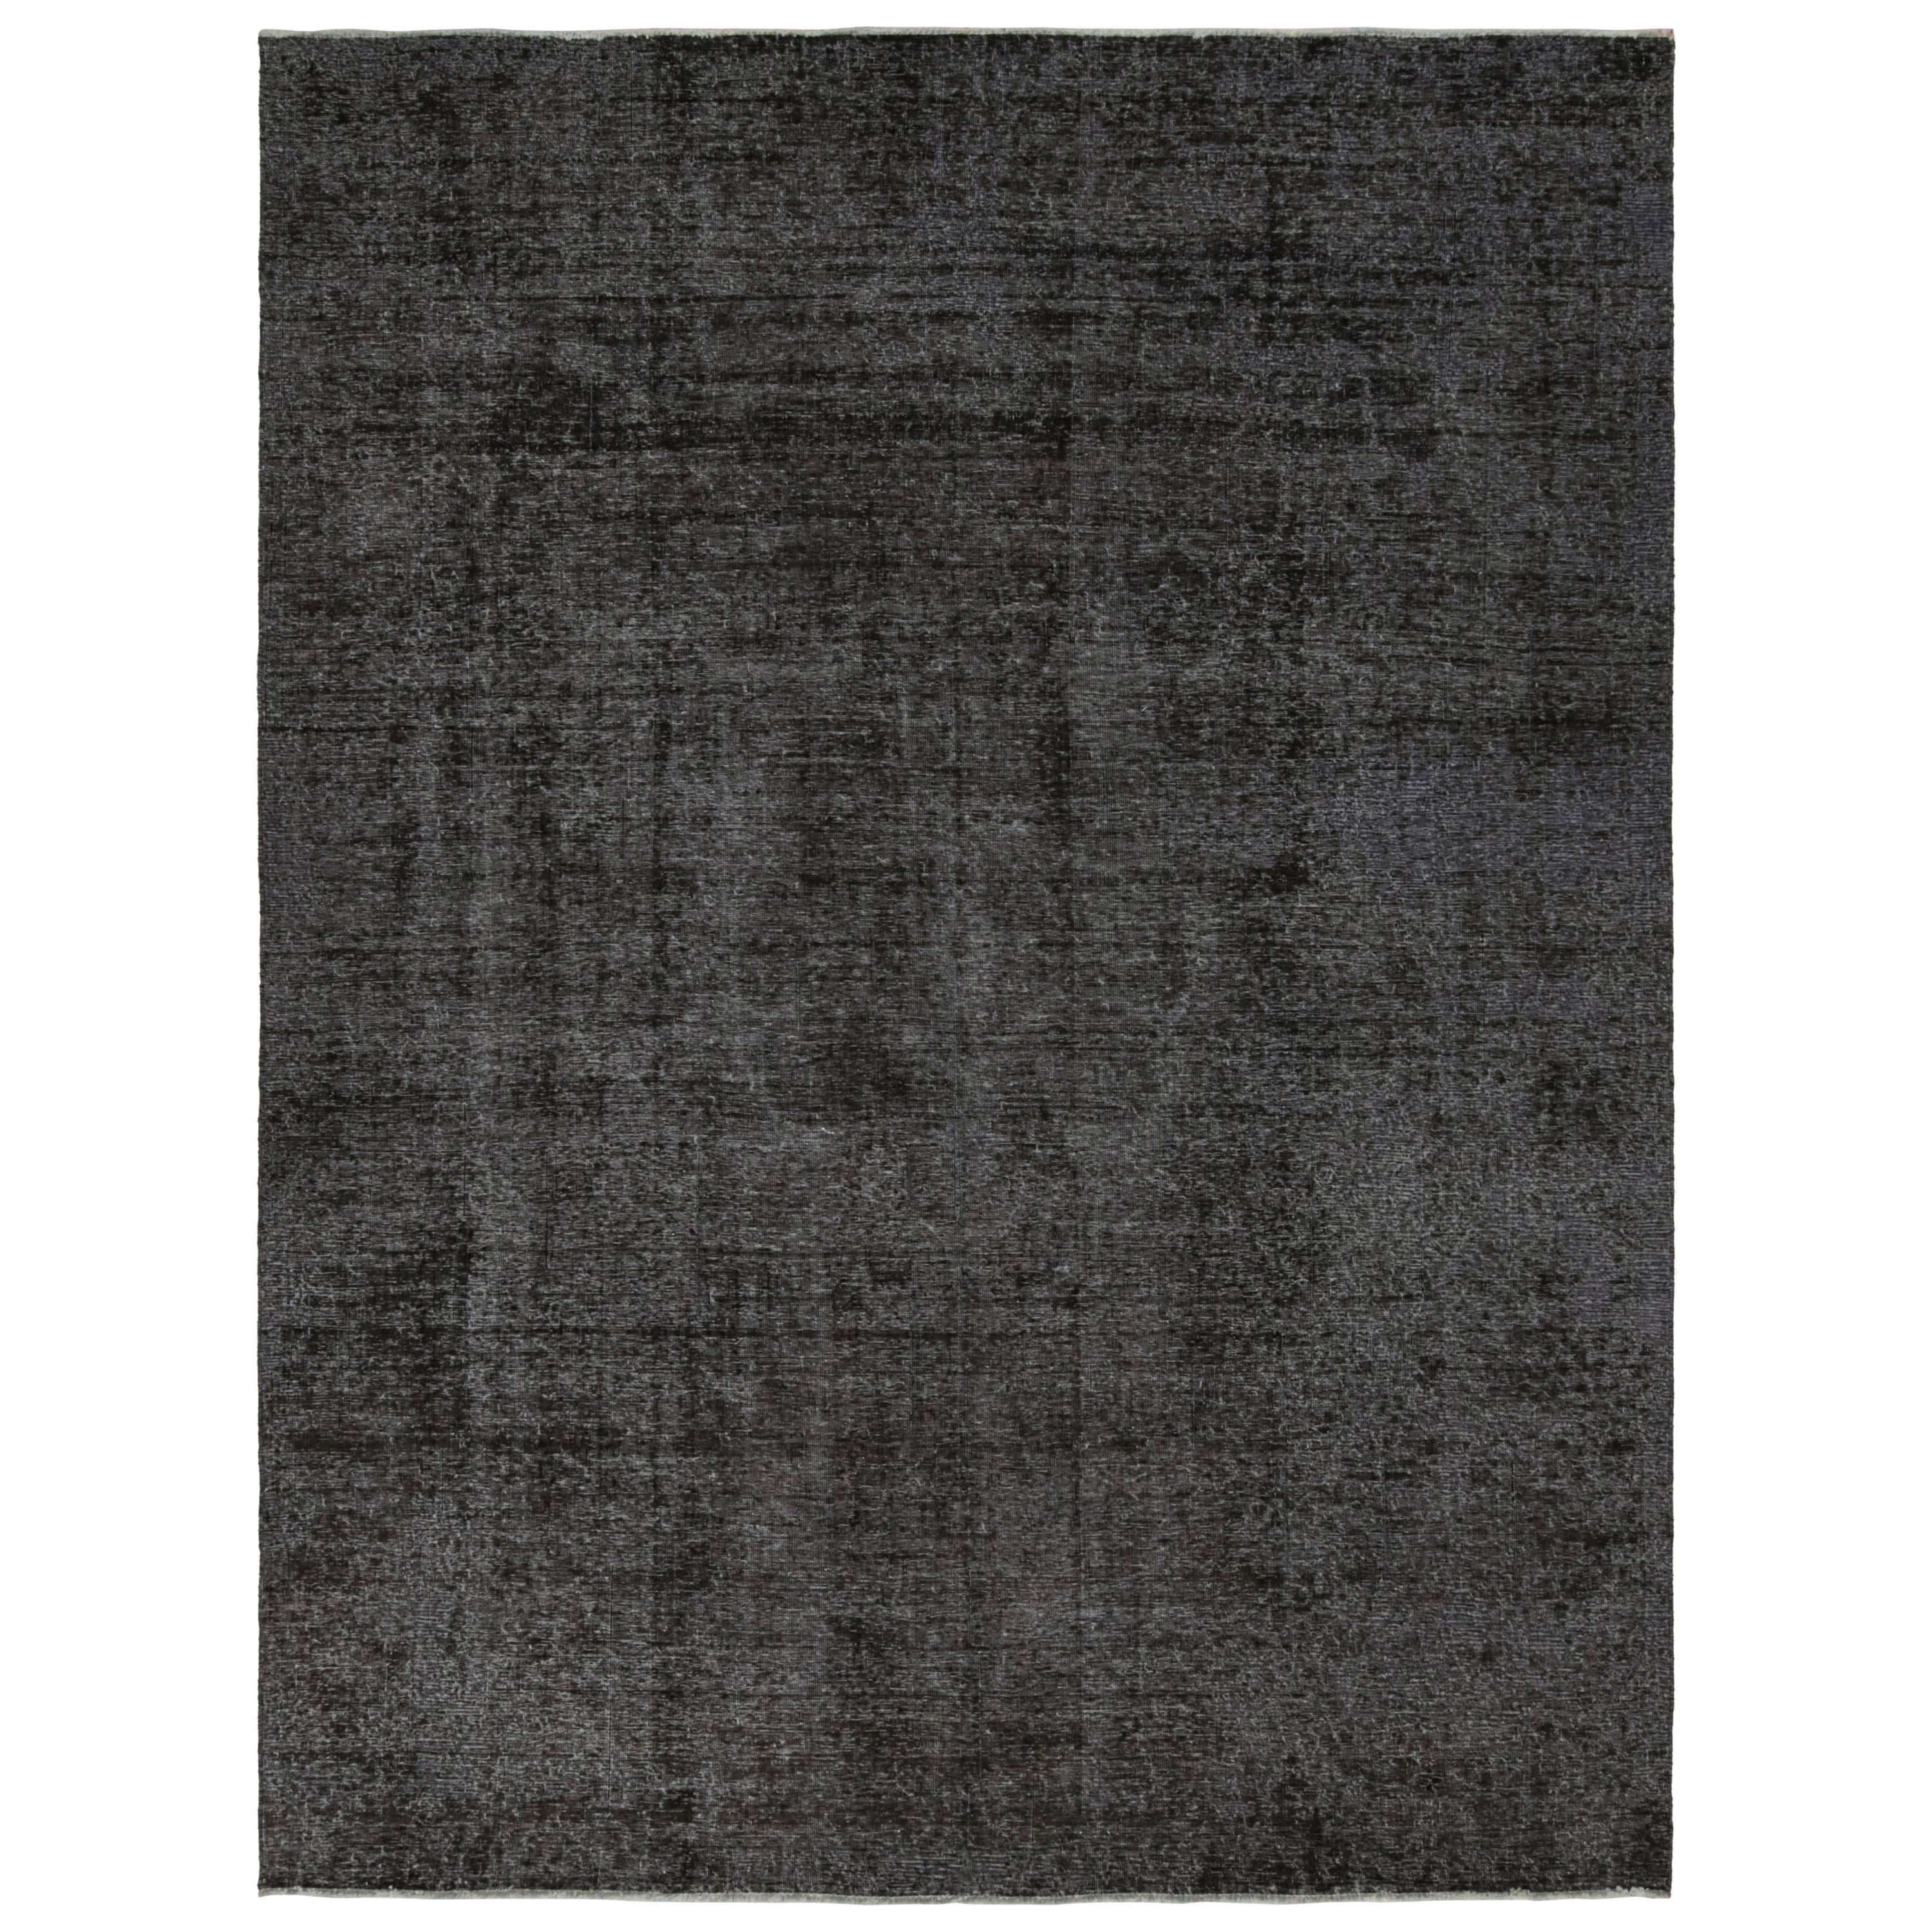 Vintage Persian rug with Black and Gray Transitional Patterns by Rug & Kilim